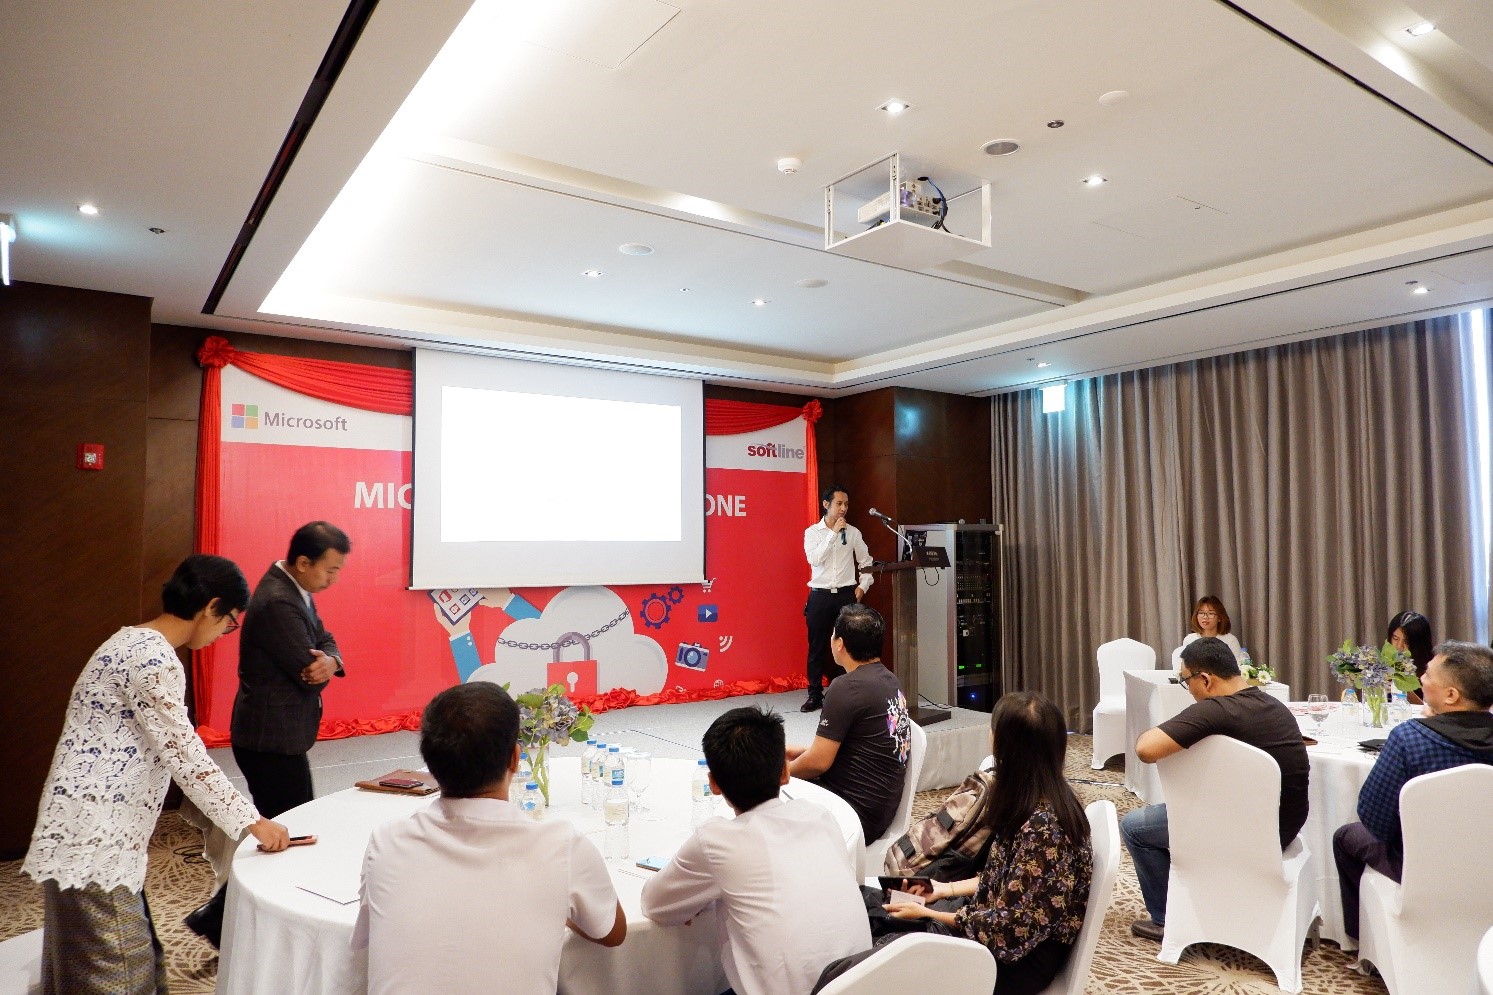 Mr. Thet Htun Aung – Technology Strategist – APAC Partners CTO Office from Microsoft 